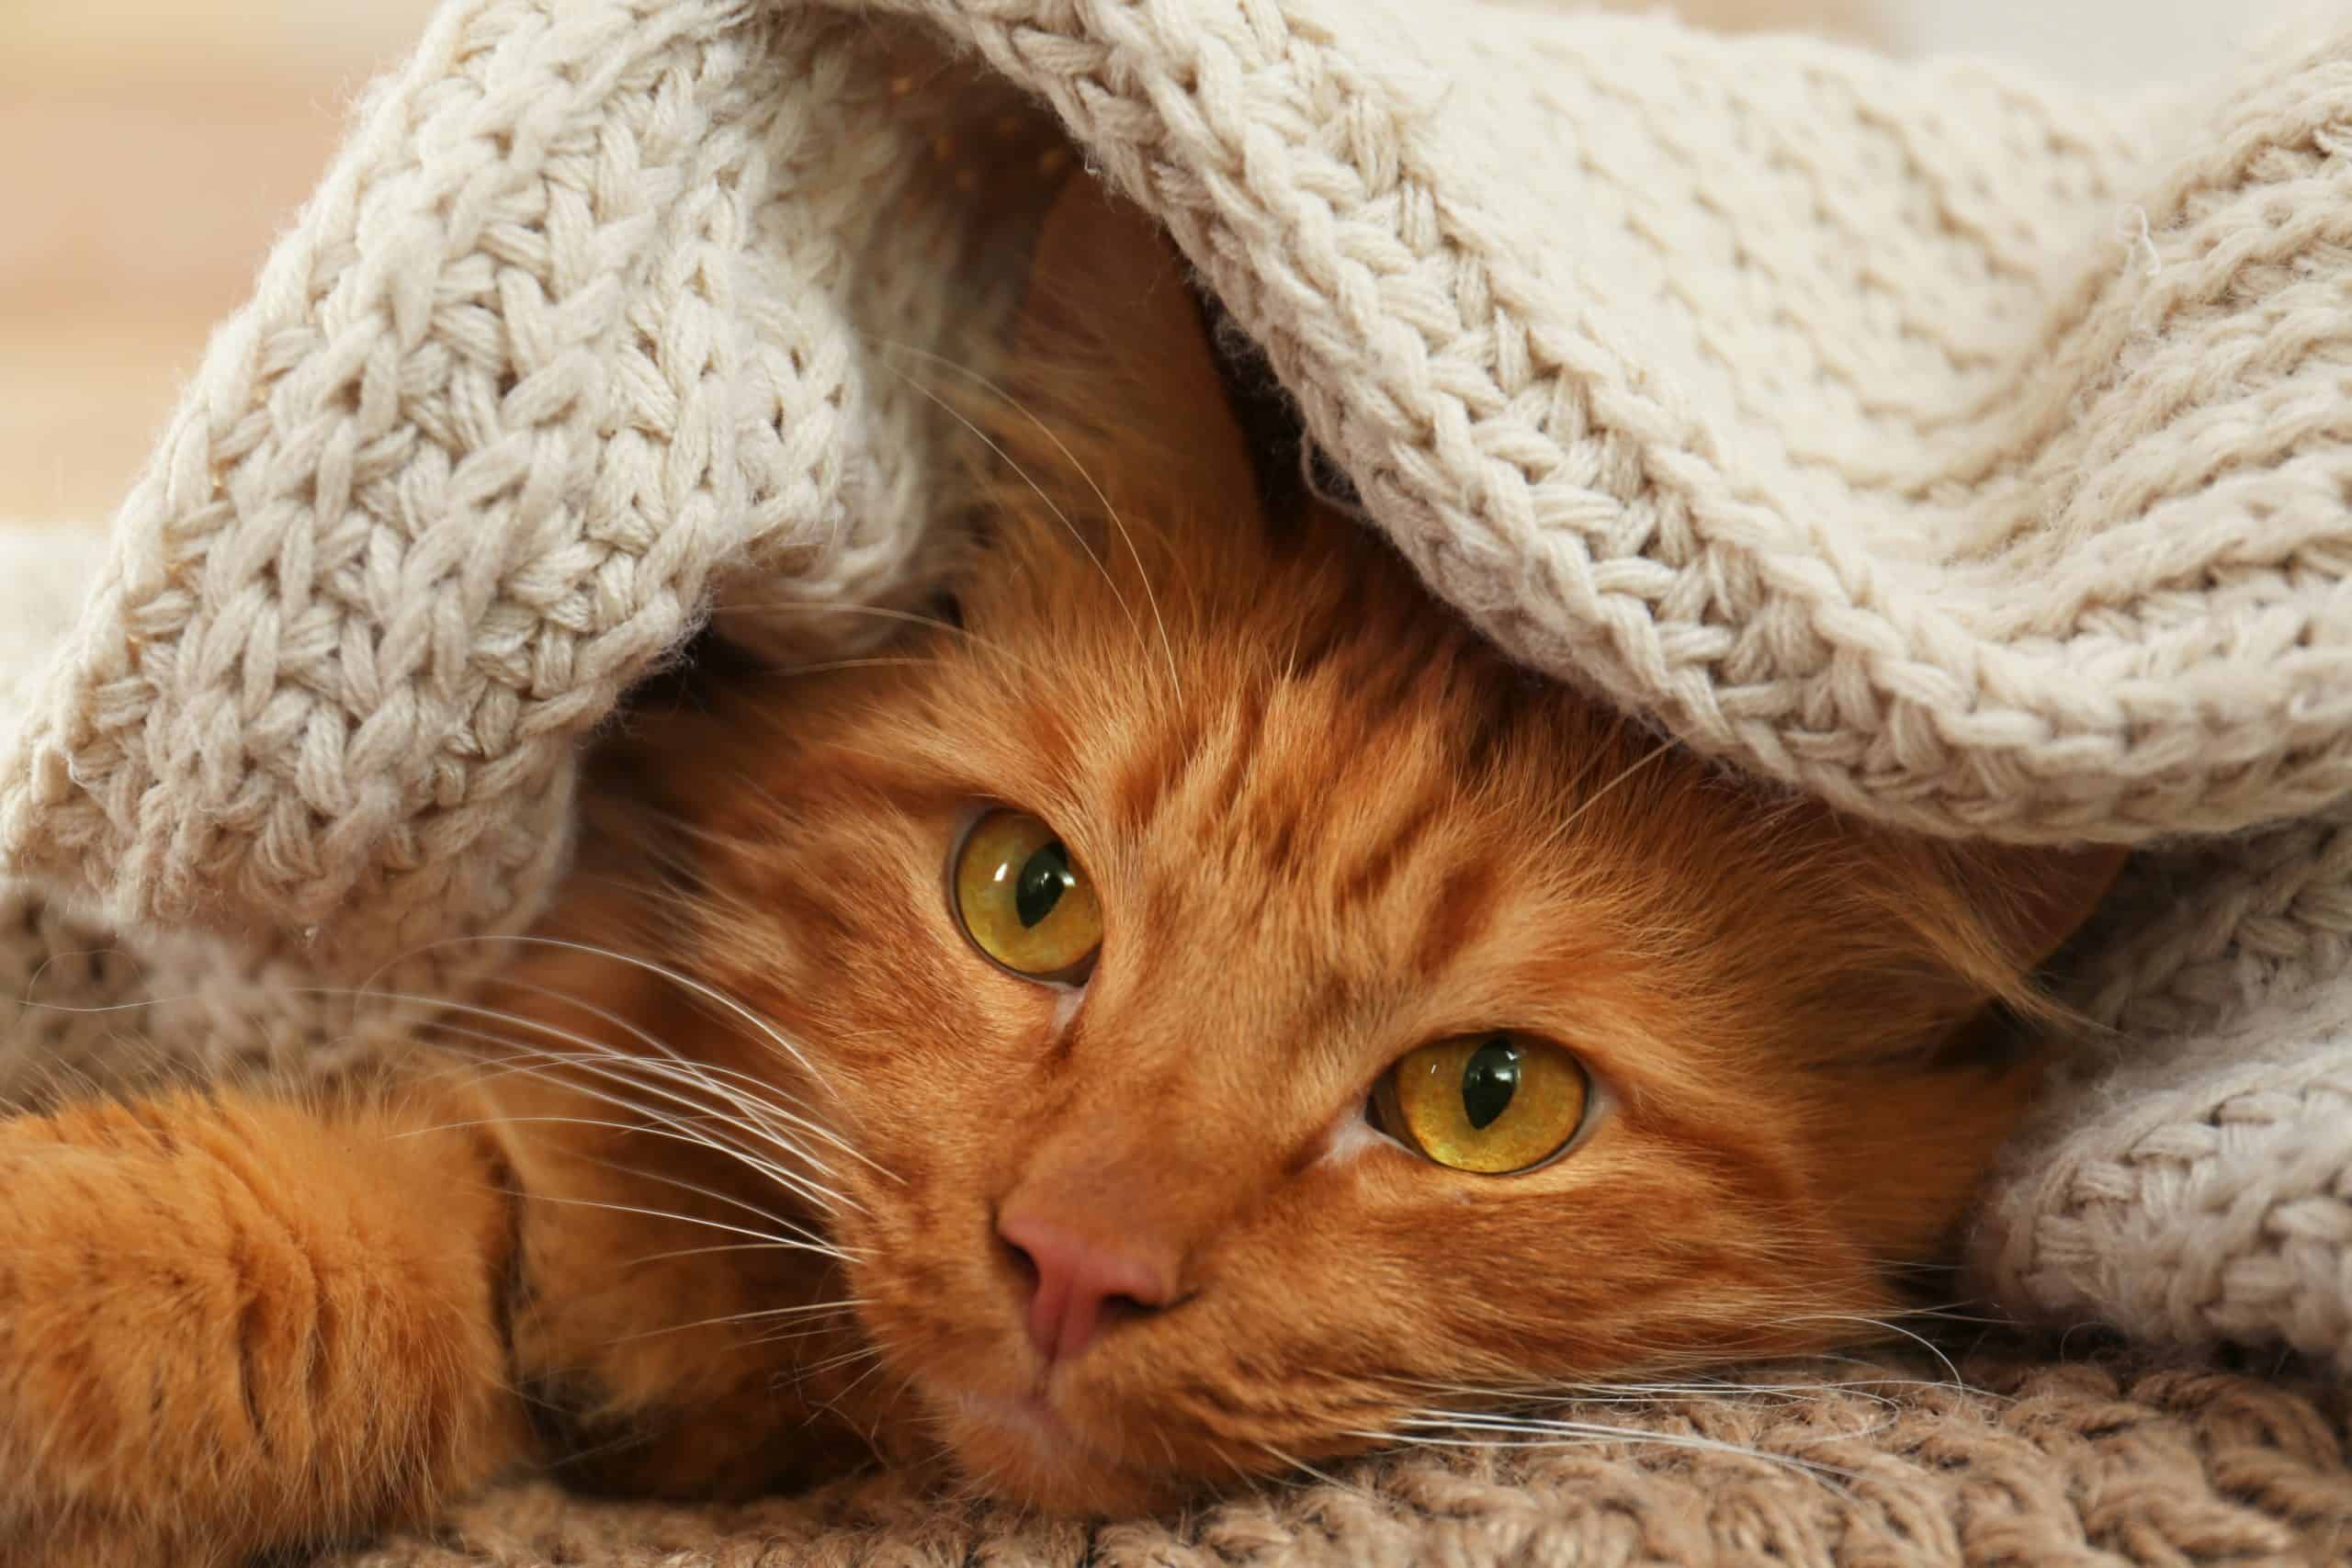 Adorable ginger cat under plaid at home. Cozy winter